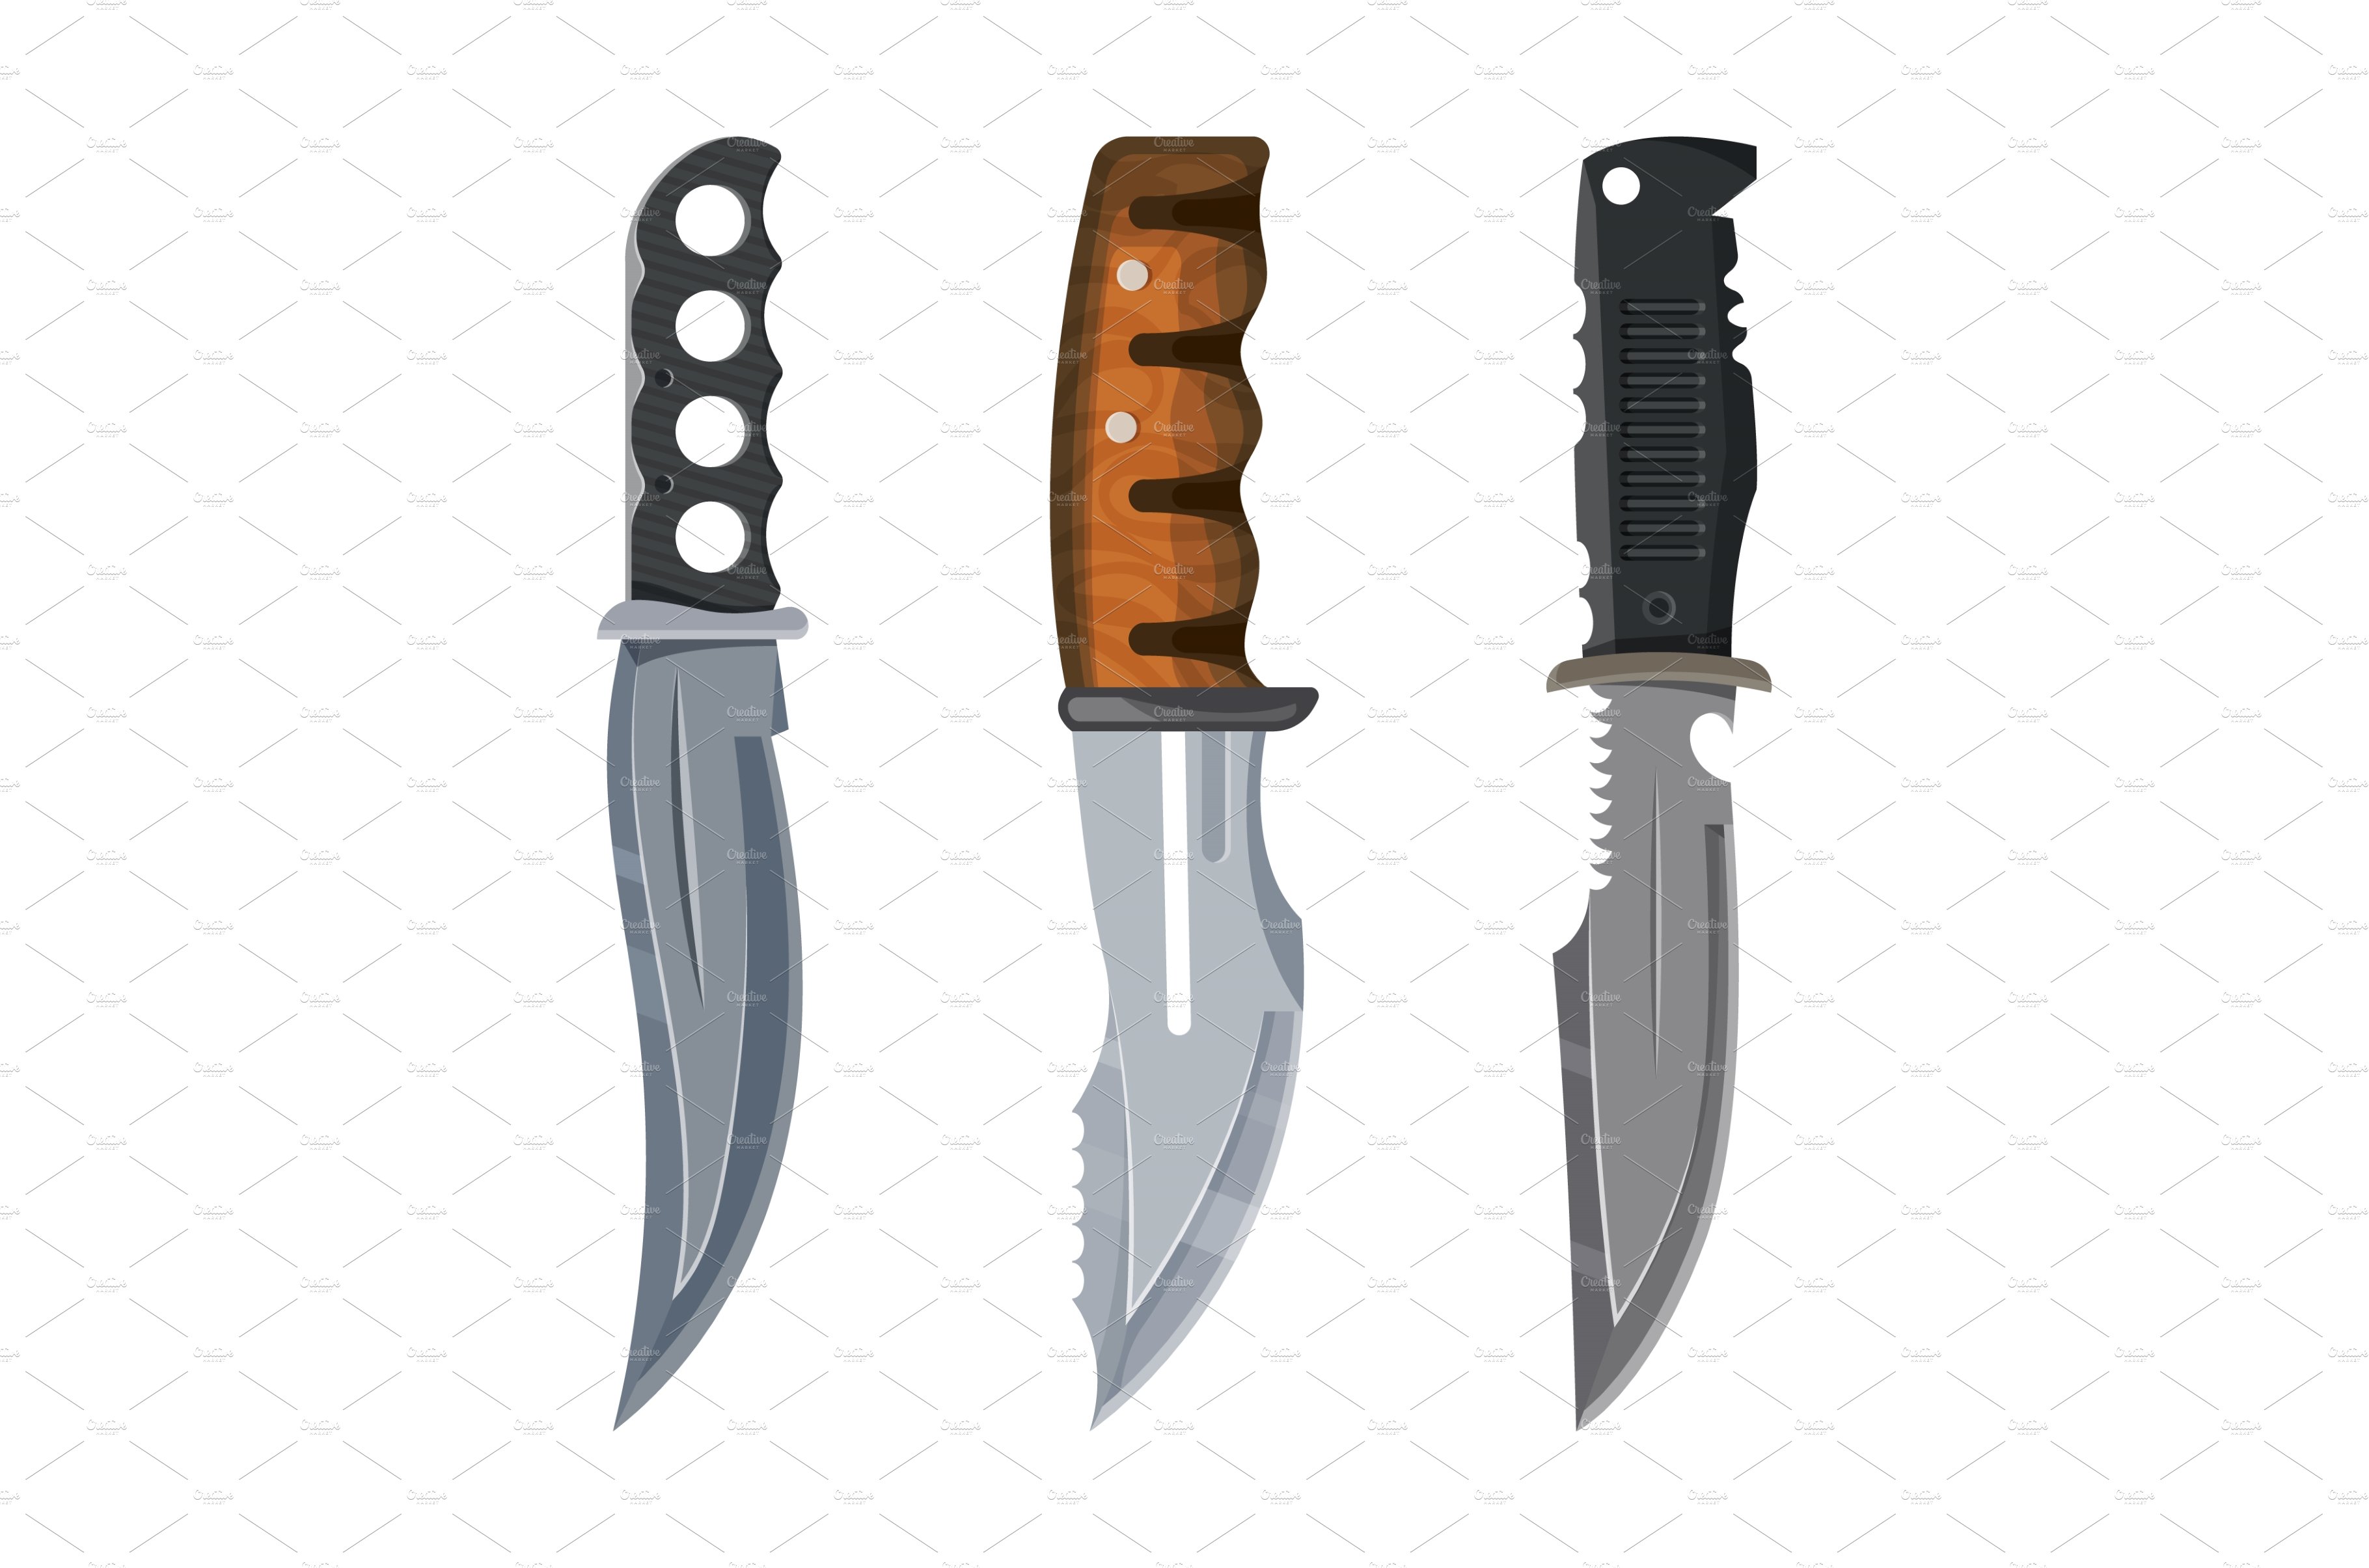 Knife, combat daggers and military cover image.